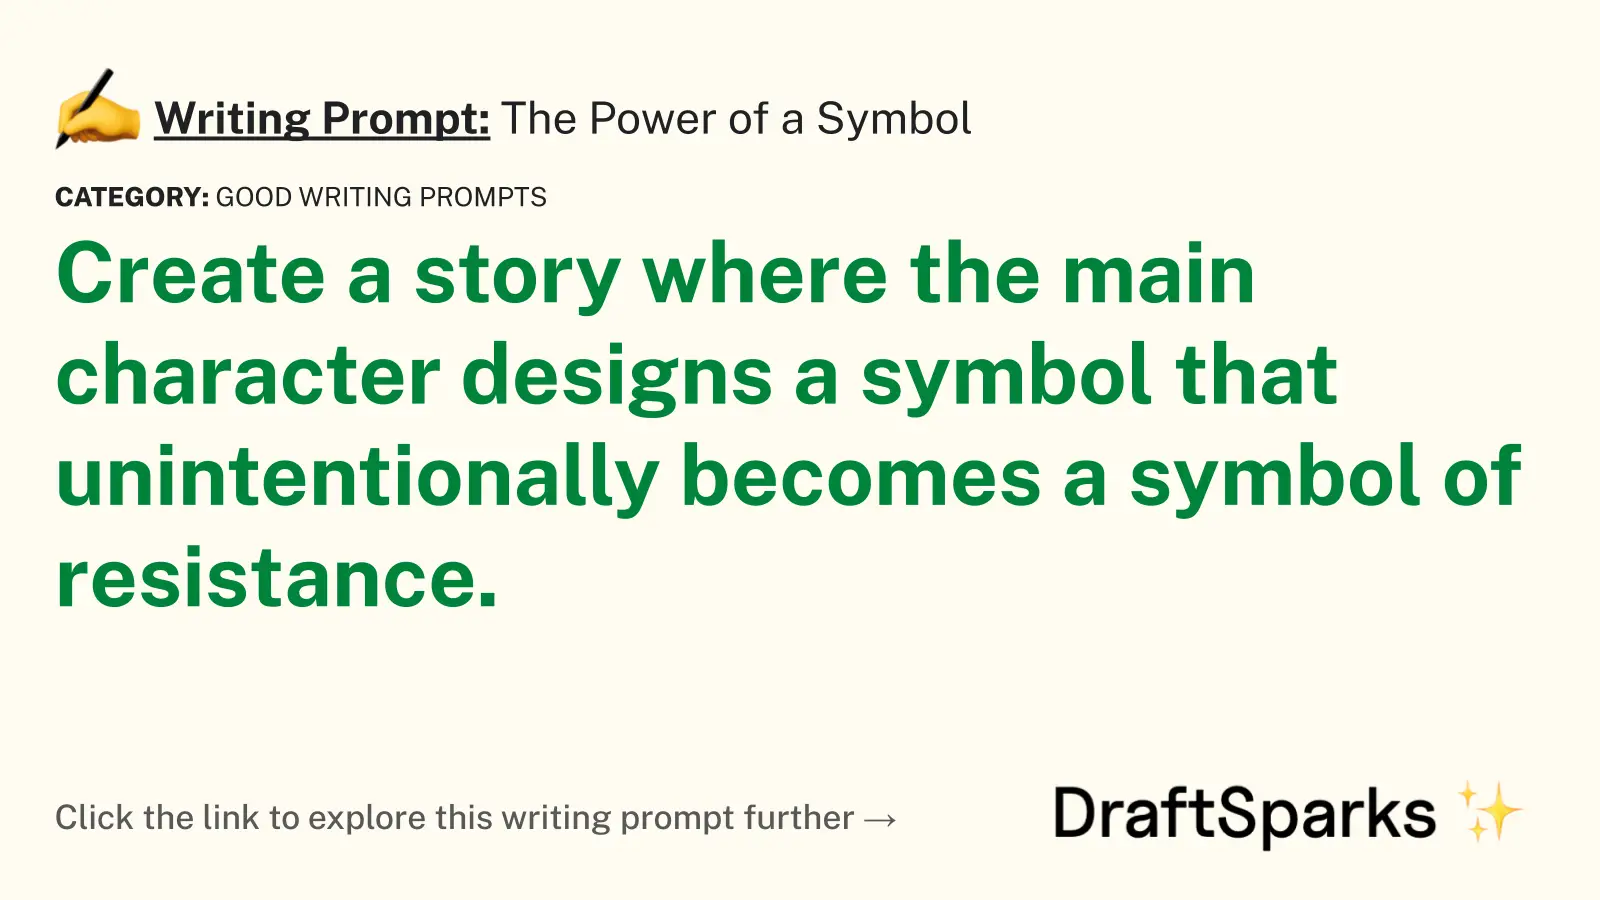 The Power of a Symbol